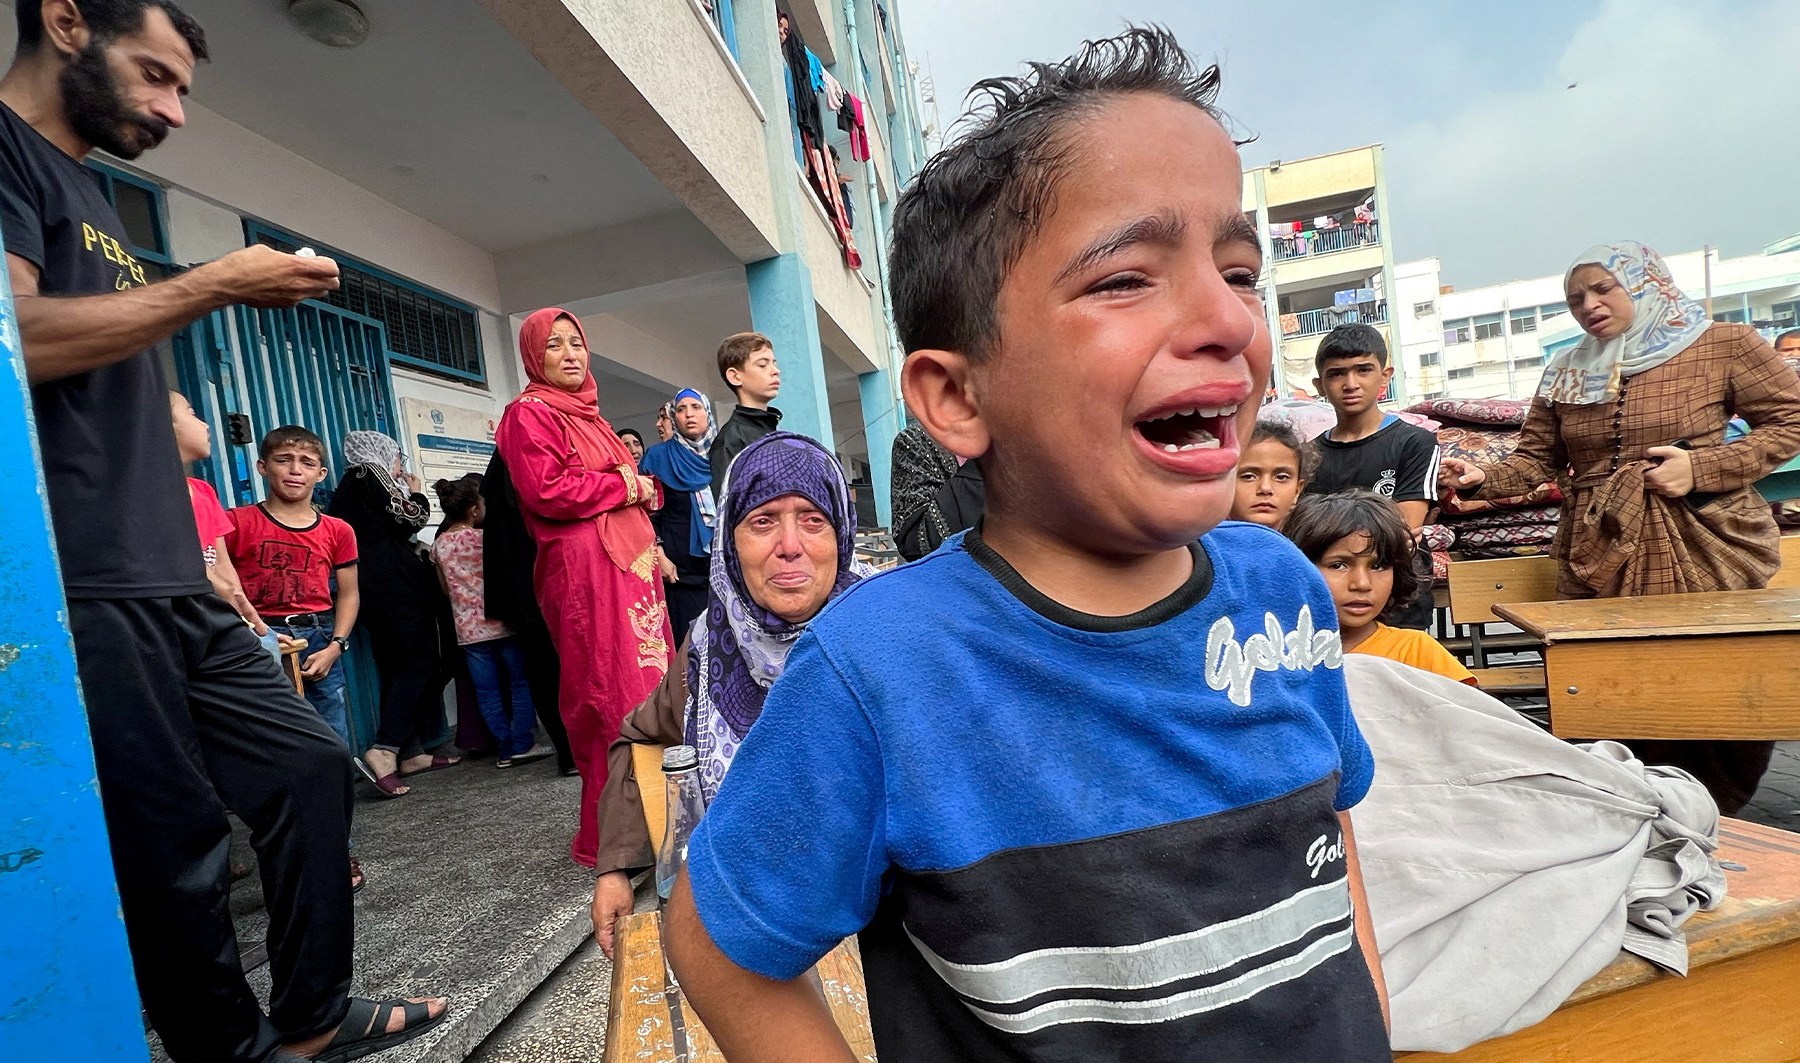 UN-run school shelters in Gaza are under attack by Israeli forces | Israel-Palestine conflict #UNrun #school #shelters #Gaza #attack #Israeli #forces #IsraelPalestine #conflict